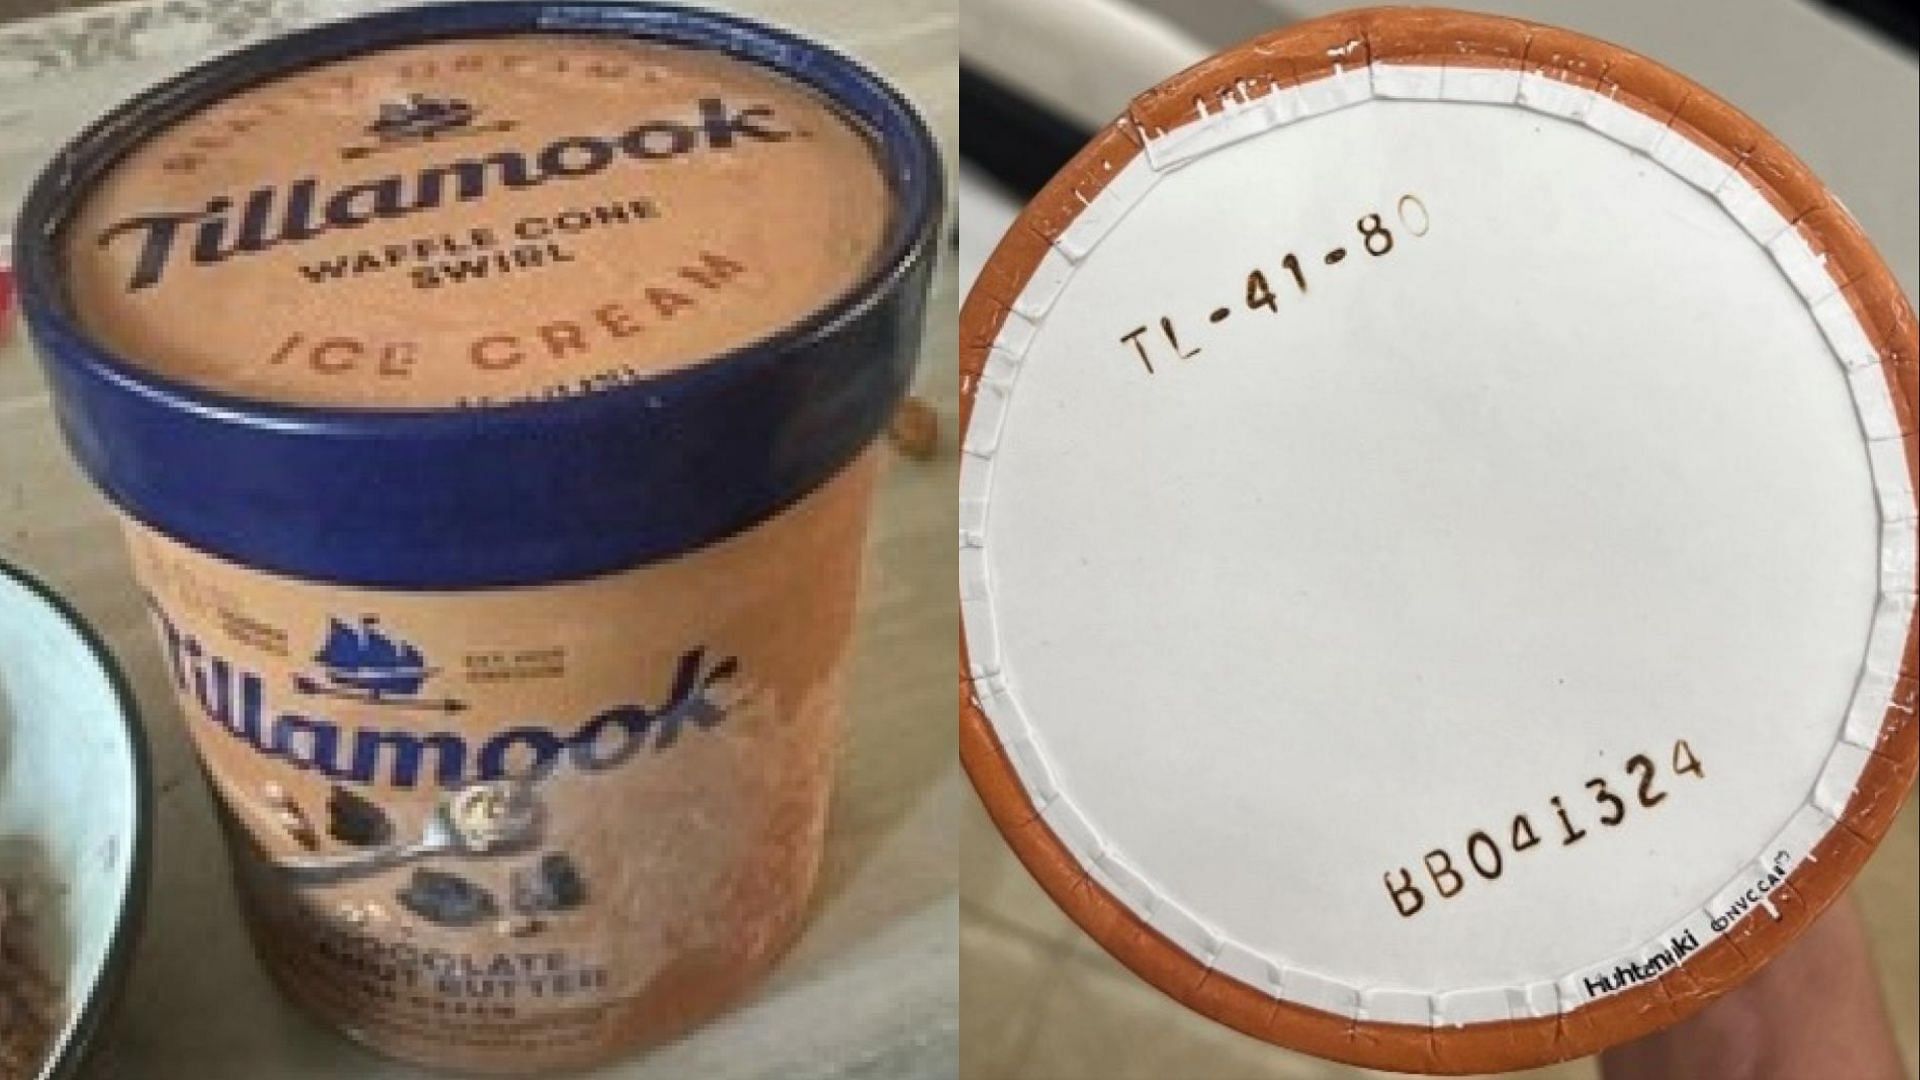 The recalled Tillamook Waffle Cone Swirl ice cream can be discarded or returned to the store of purchase for a full refund (Image via Food and Drug Administration)